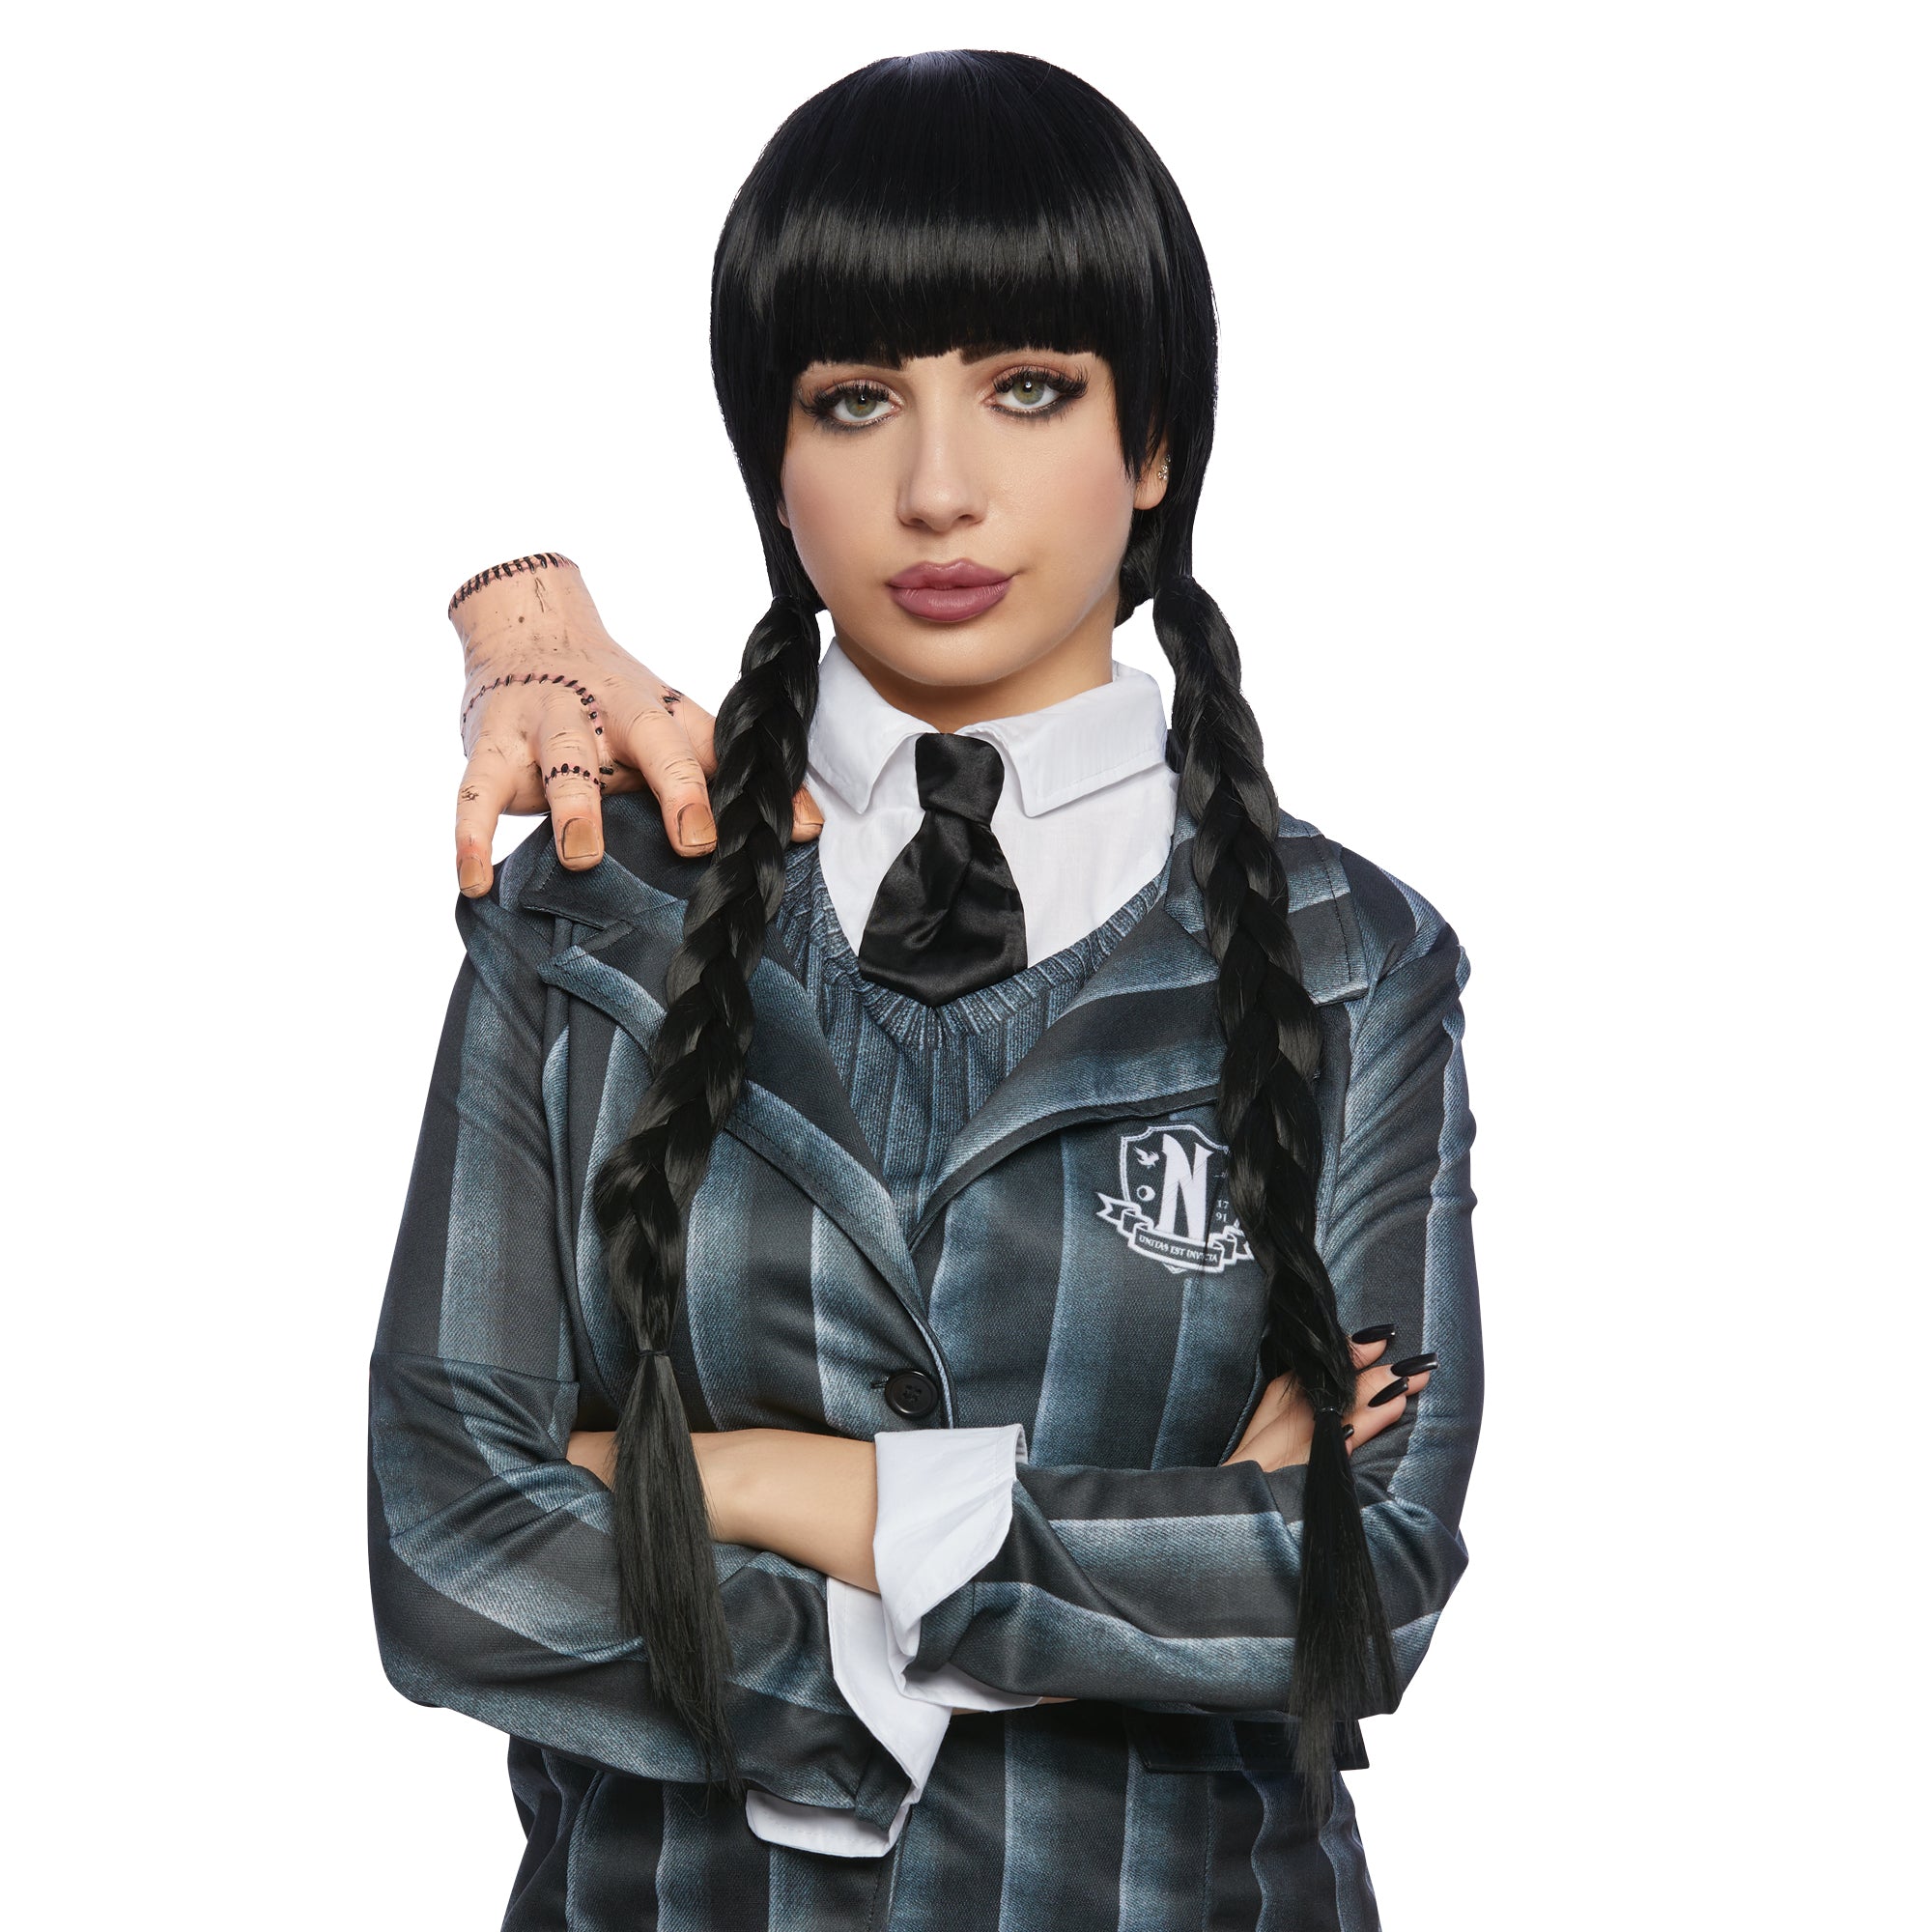 Jenna Black Long Braided Wig for Adults